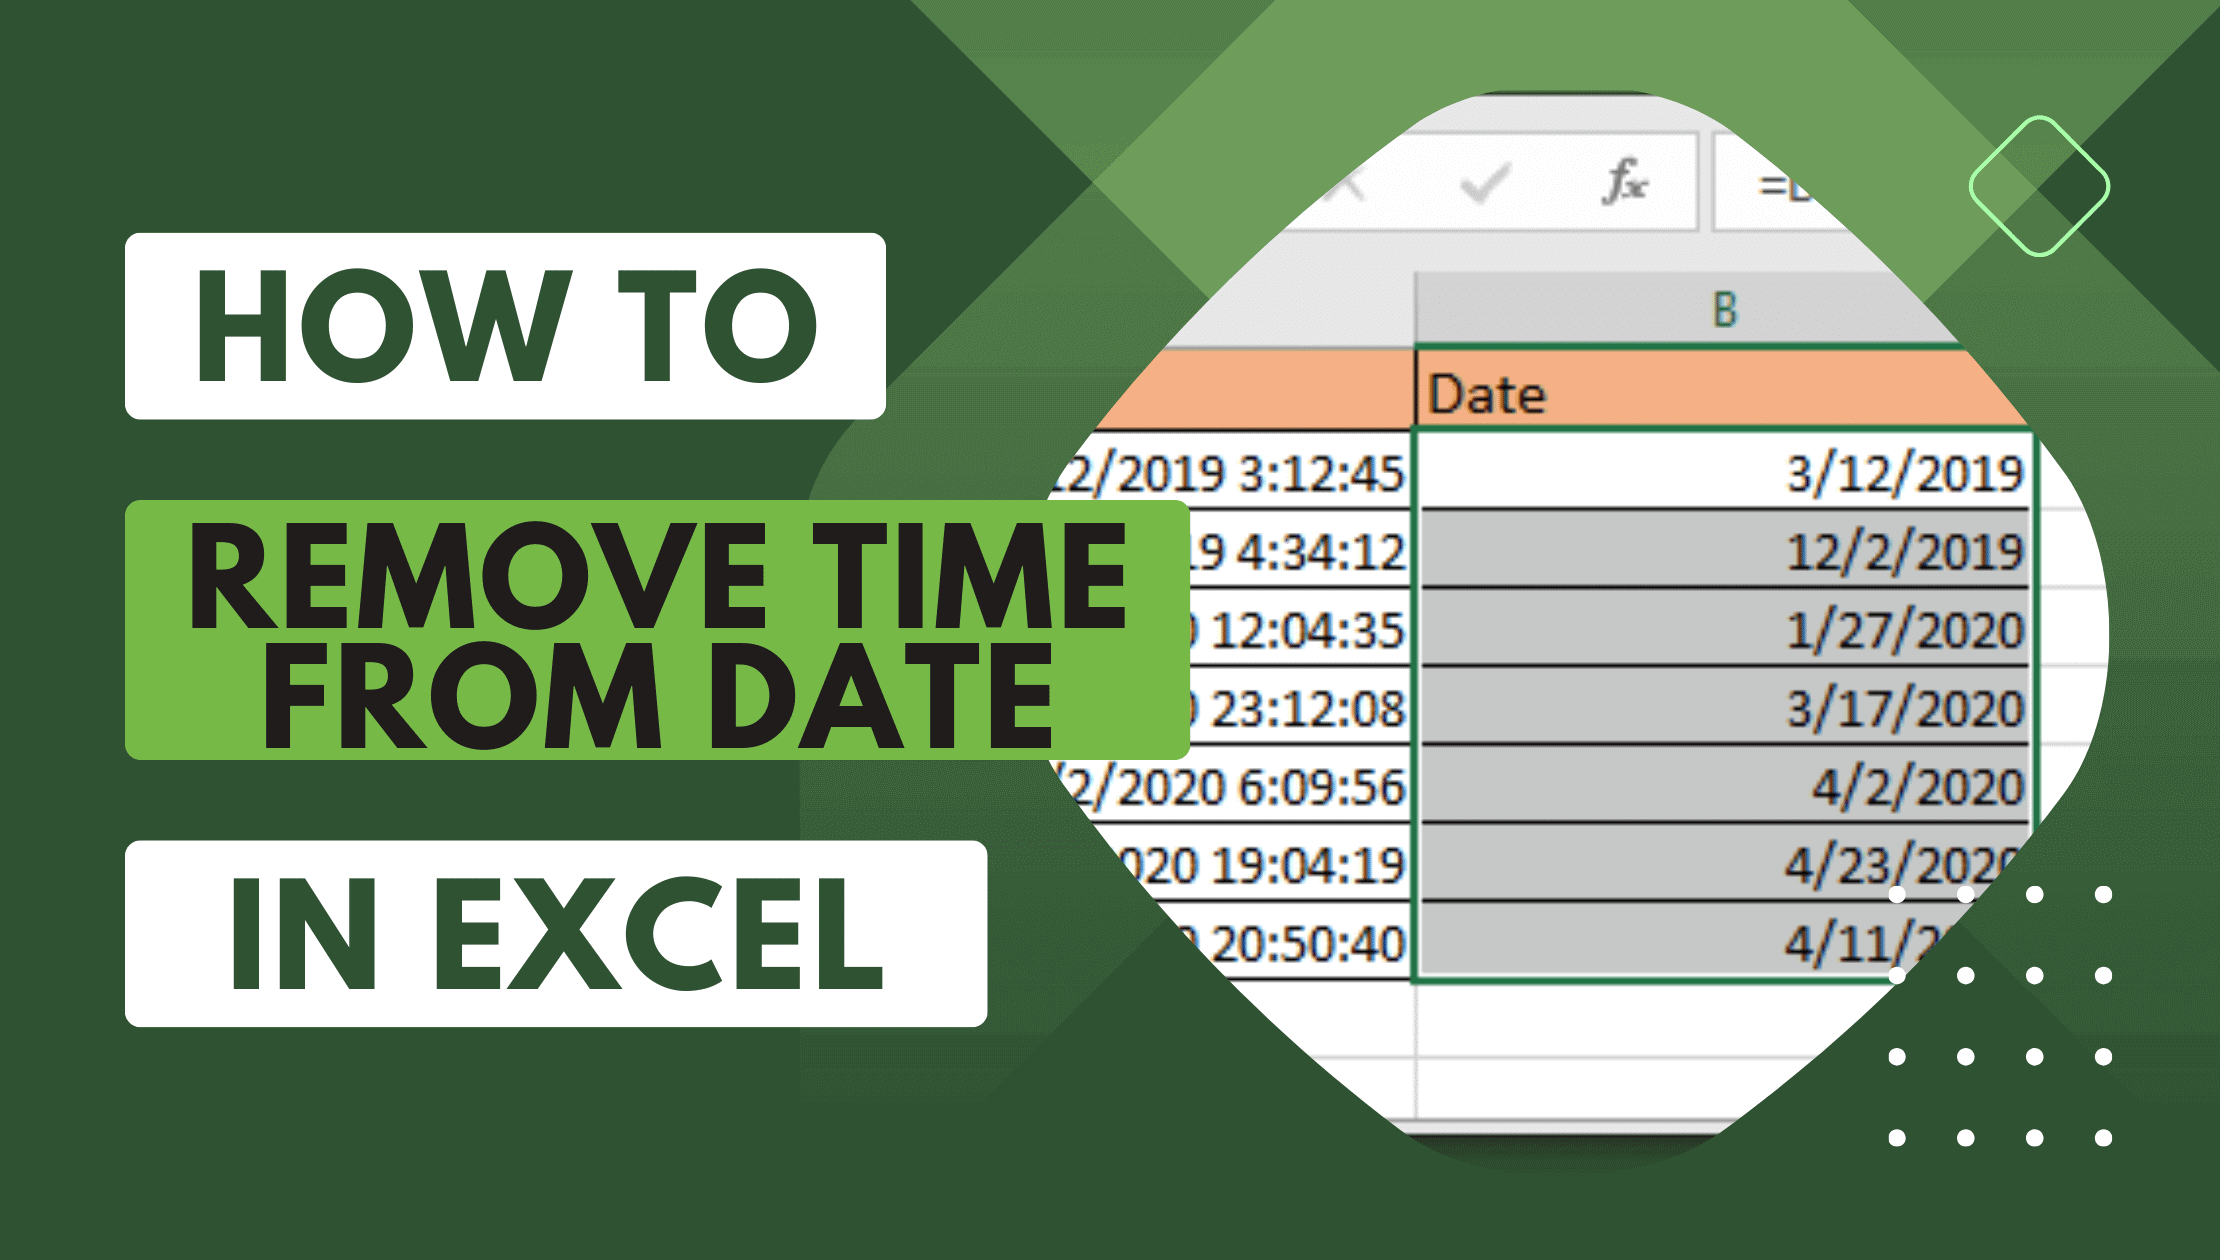 How to Remove Time From Date in Excel